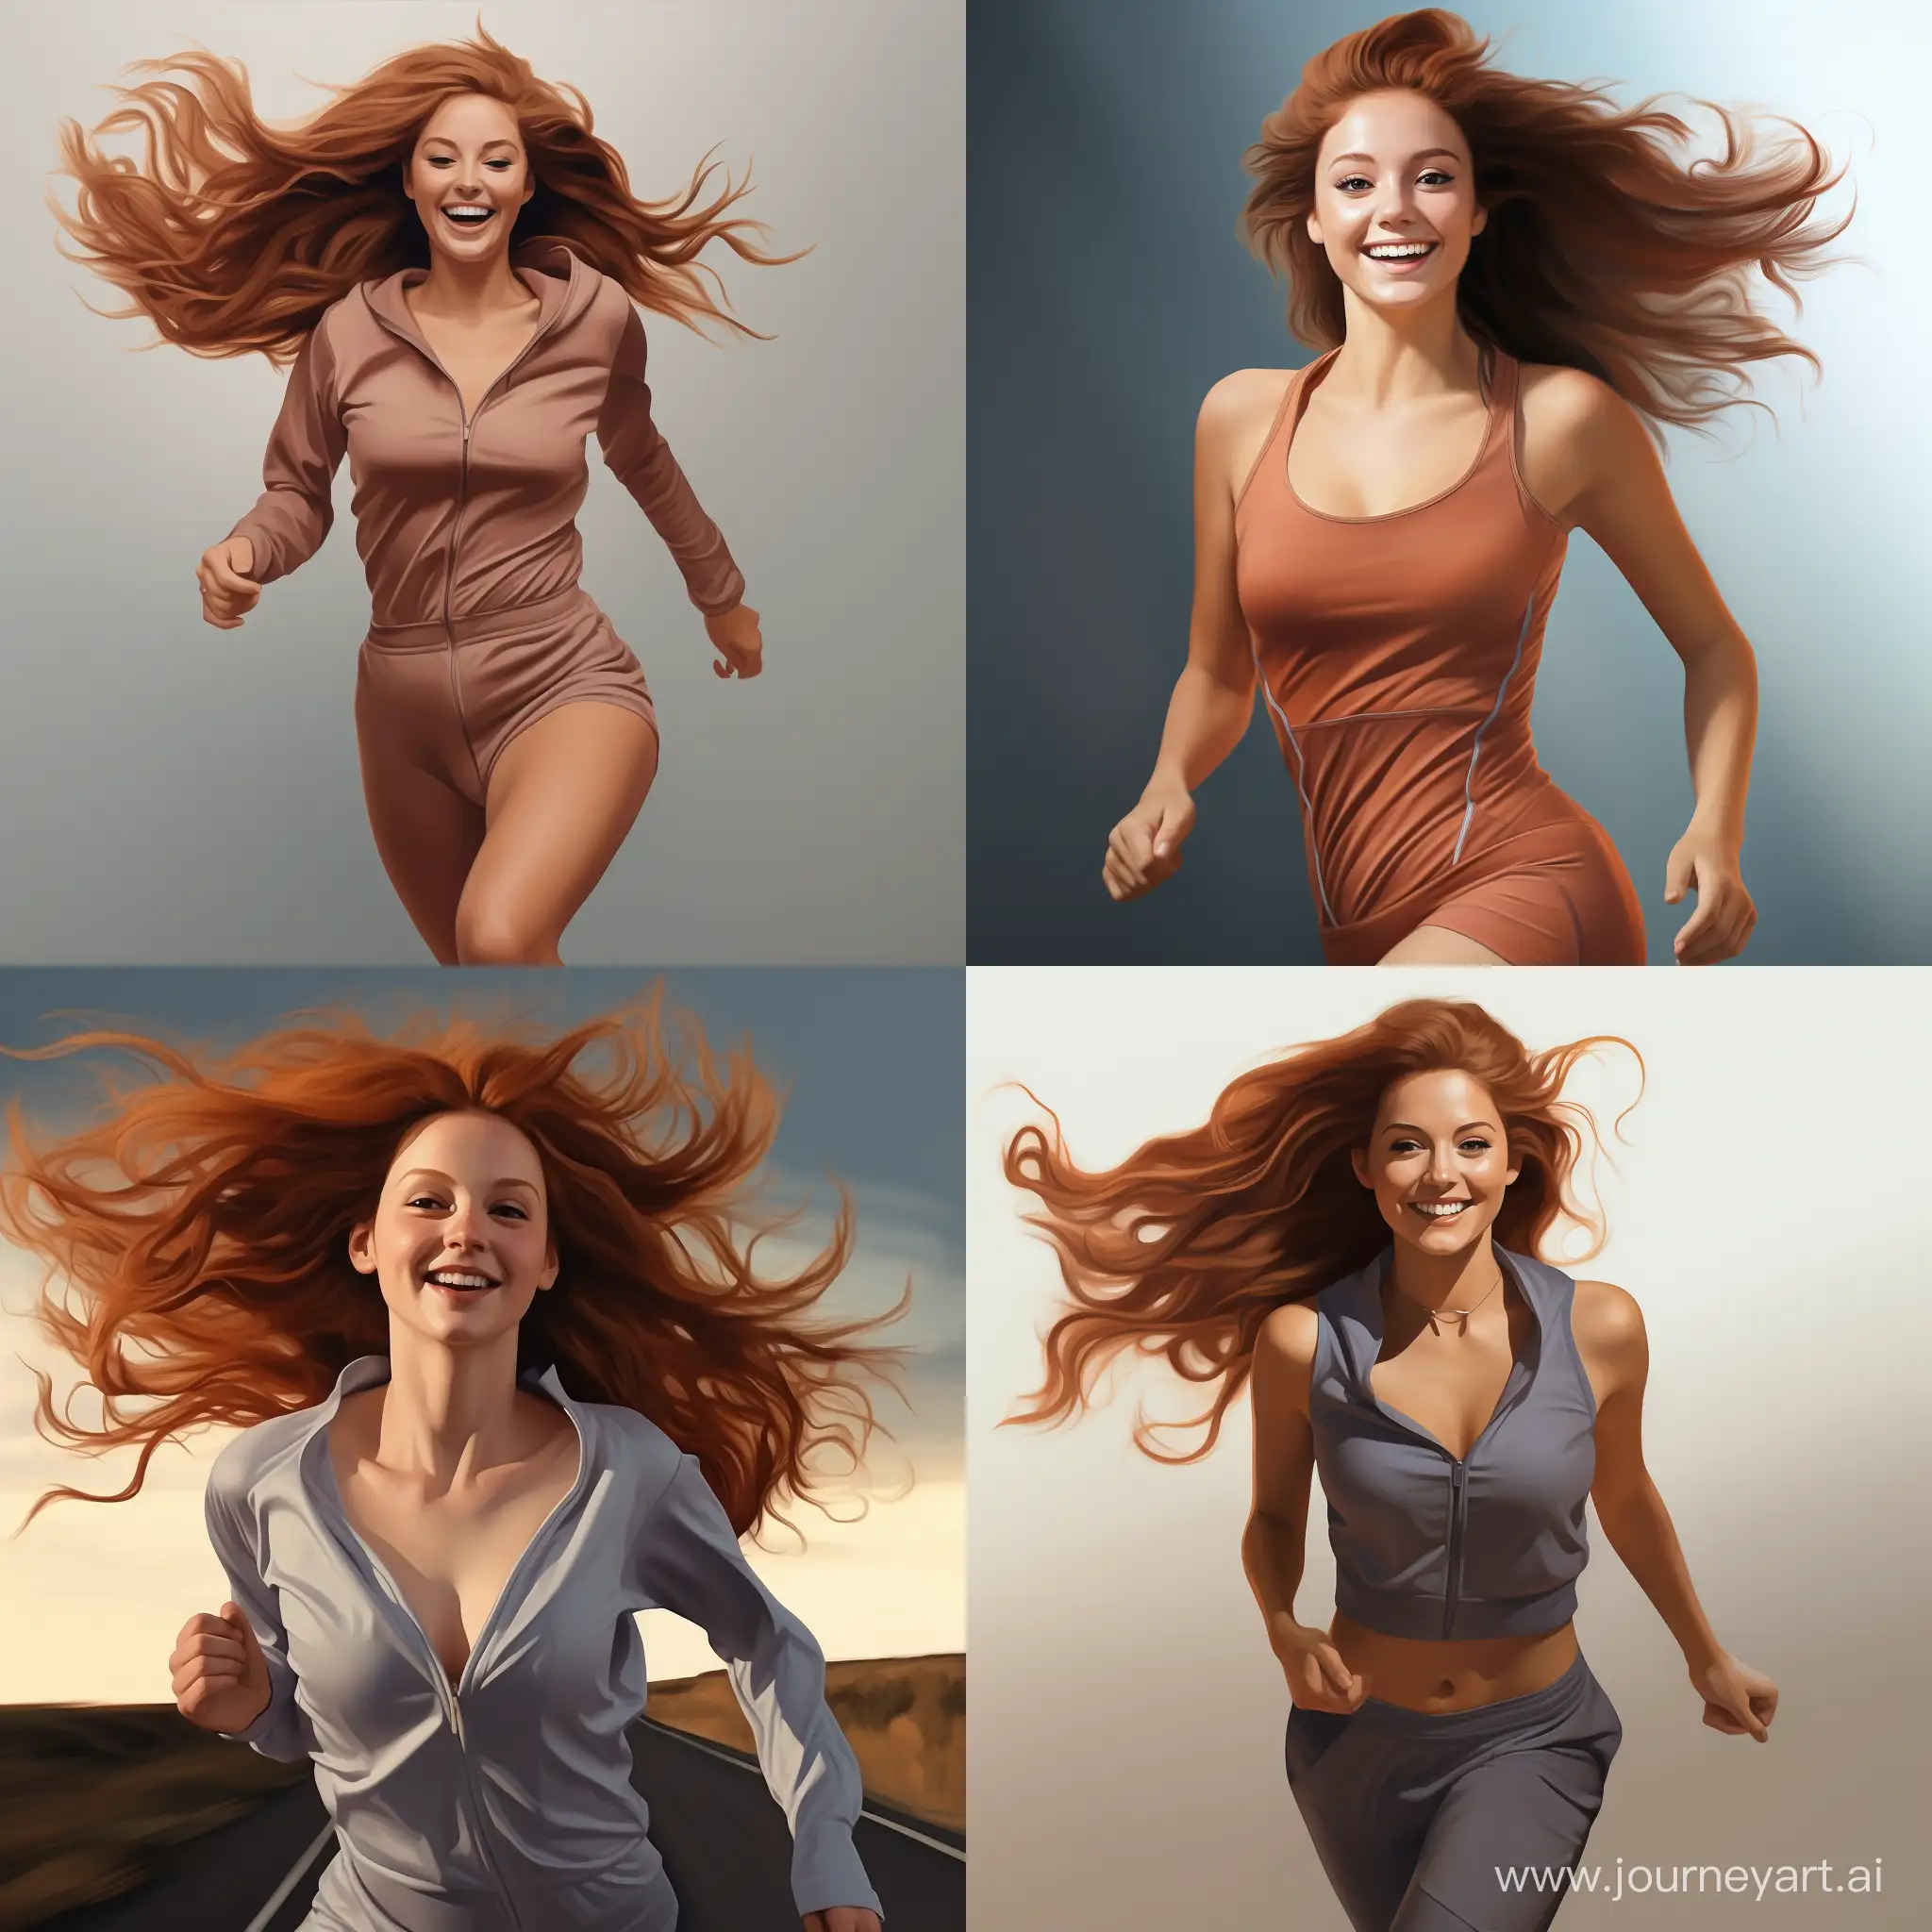 Energetic-AuburnHaired-Girl-in-Stylish-Jumpsuit-Running-with-a-Radiant-Smile